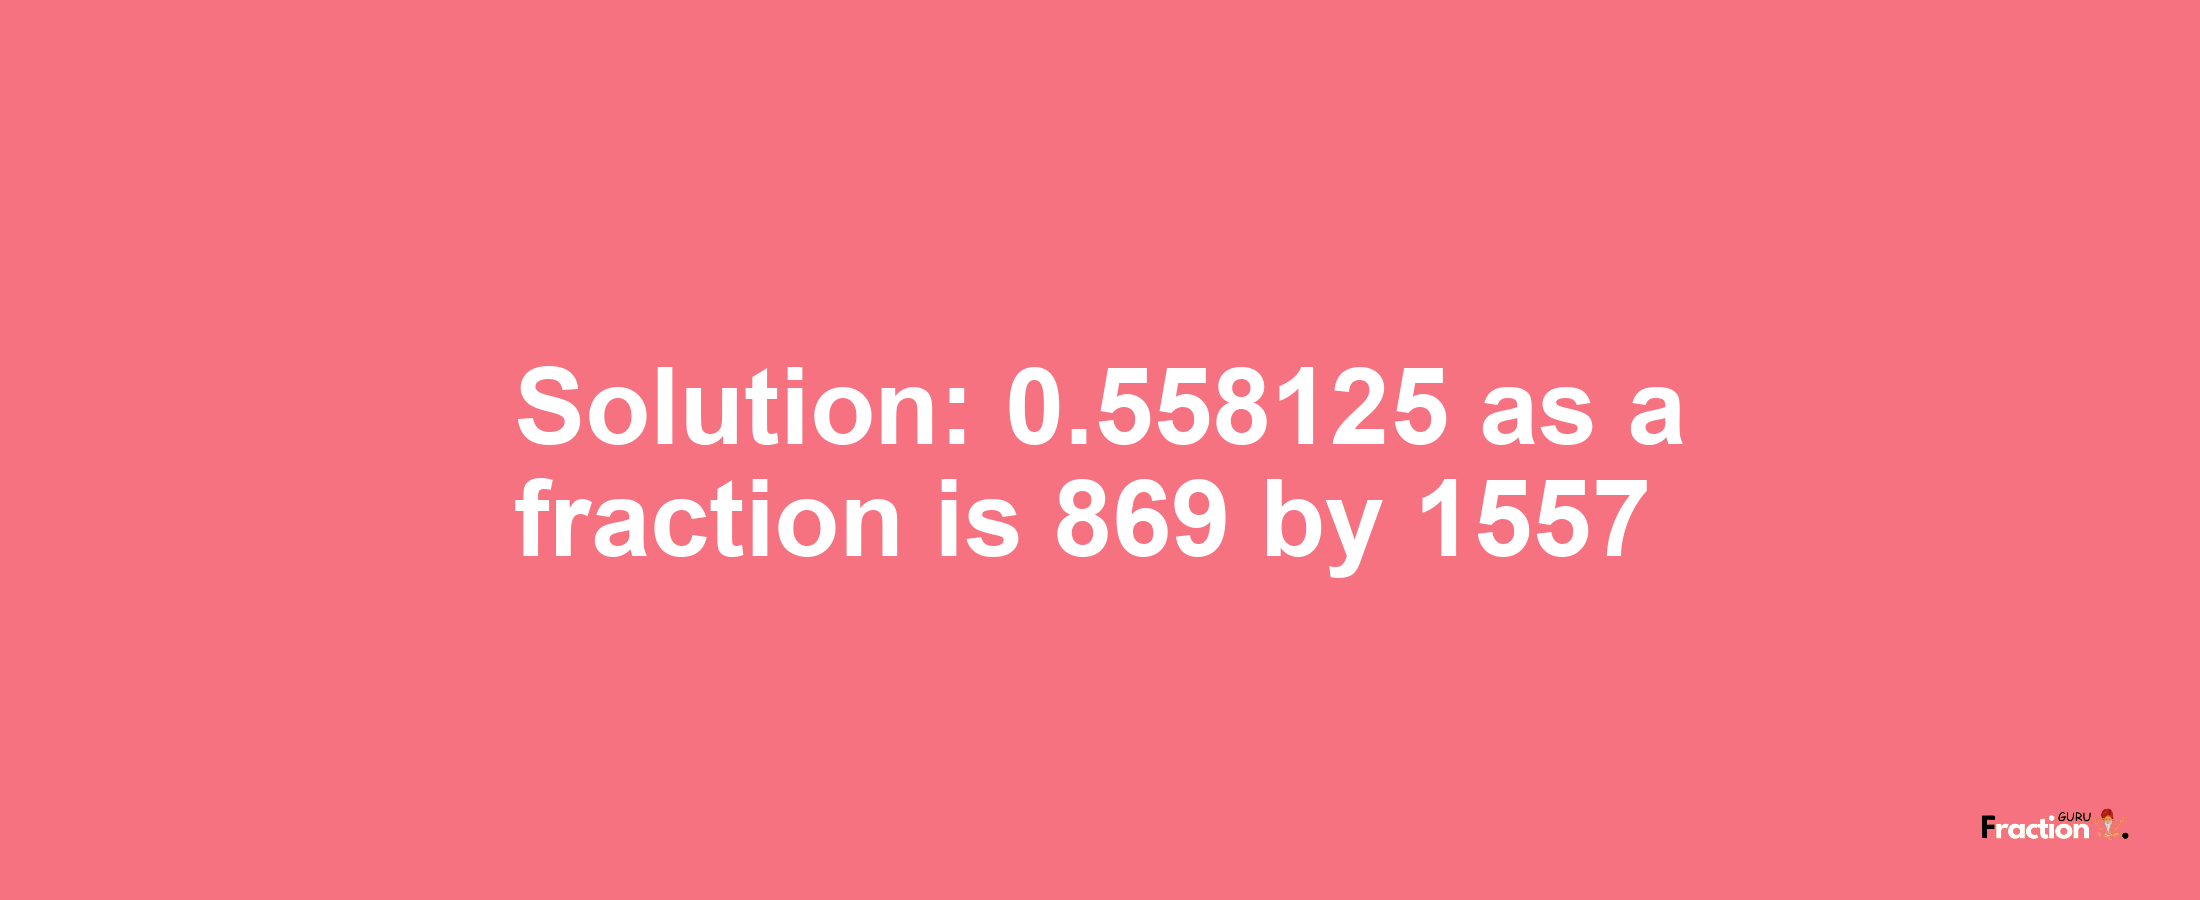 Solution:0.558125 as a fraction is 869/1557